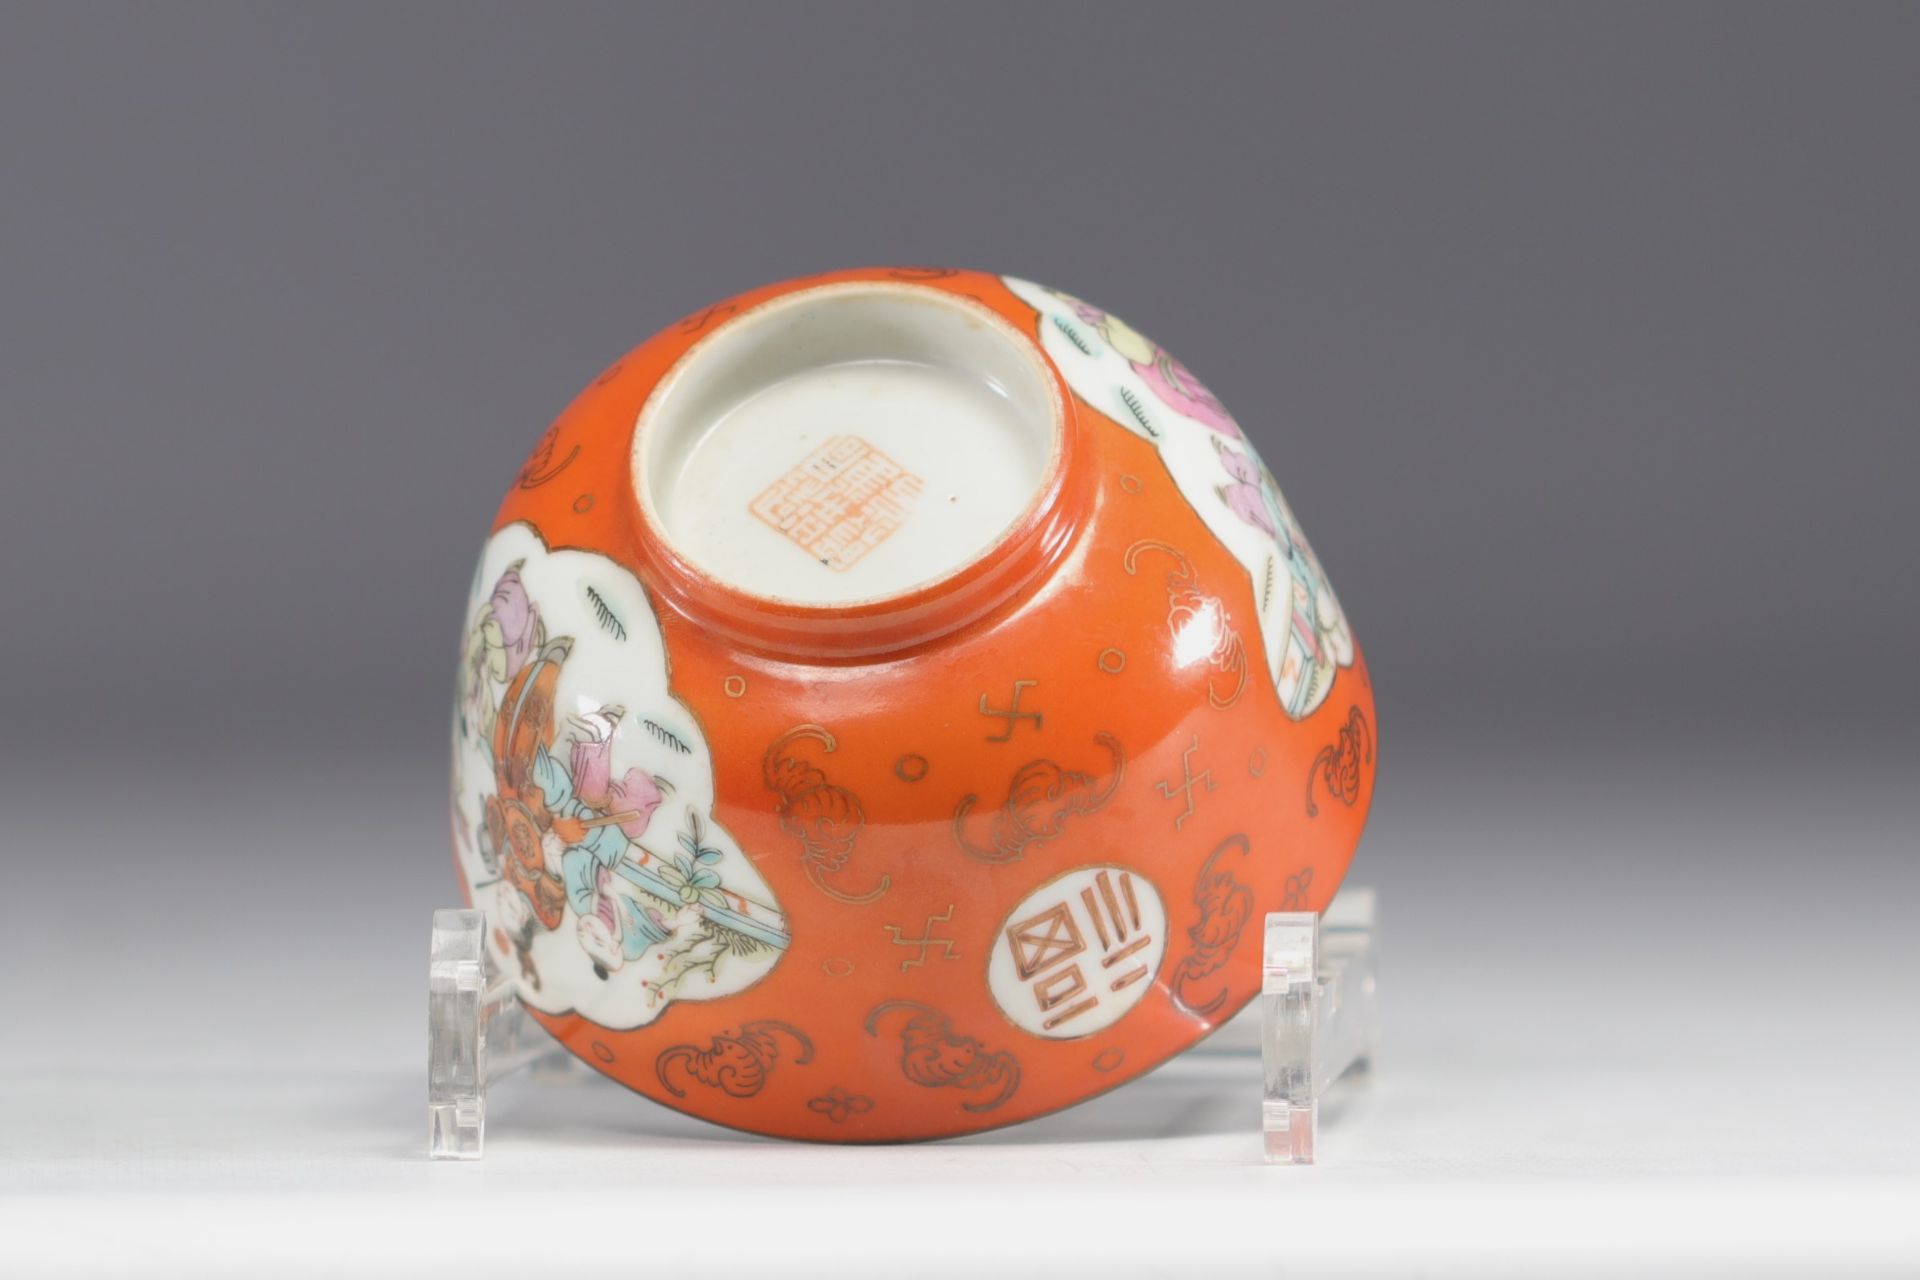 China - An orange porcelain bowl decorated with figures and bats, 19th century. - Image 5 of 5